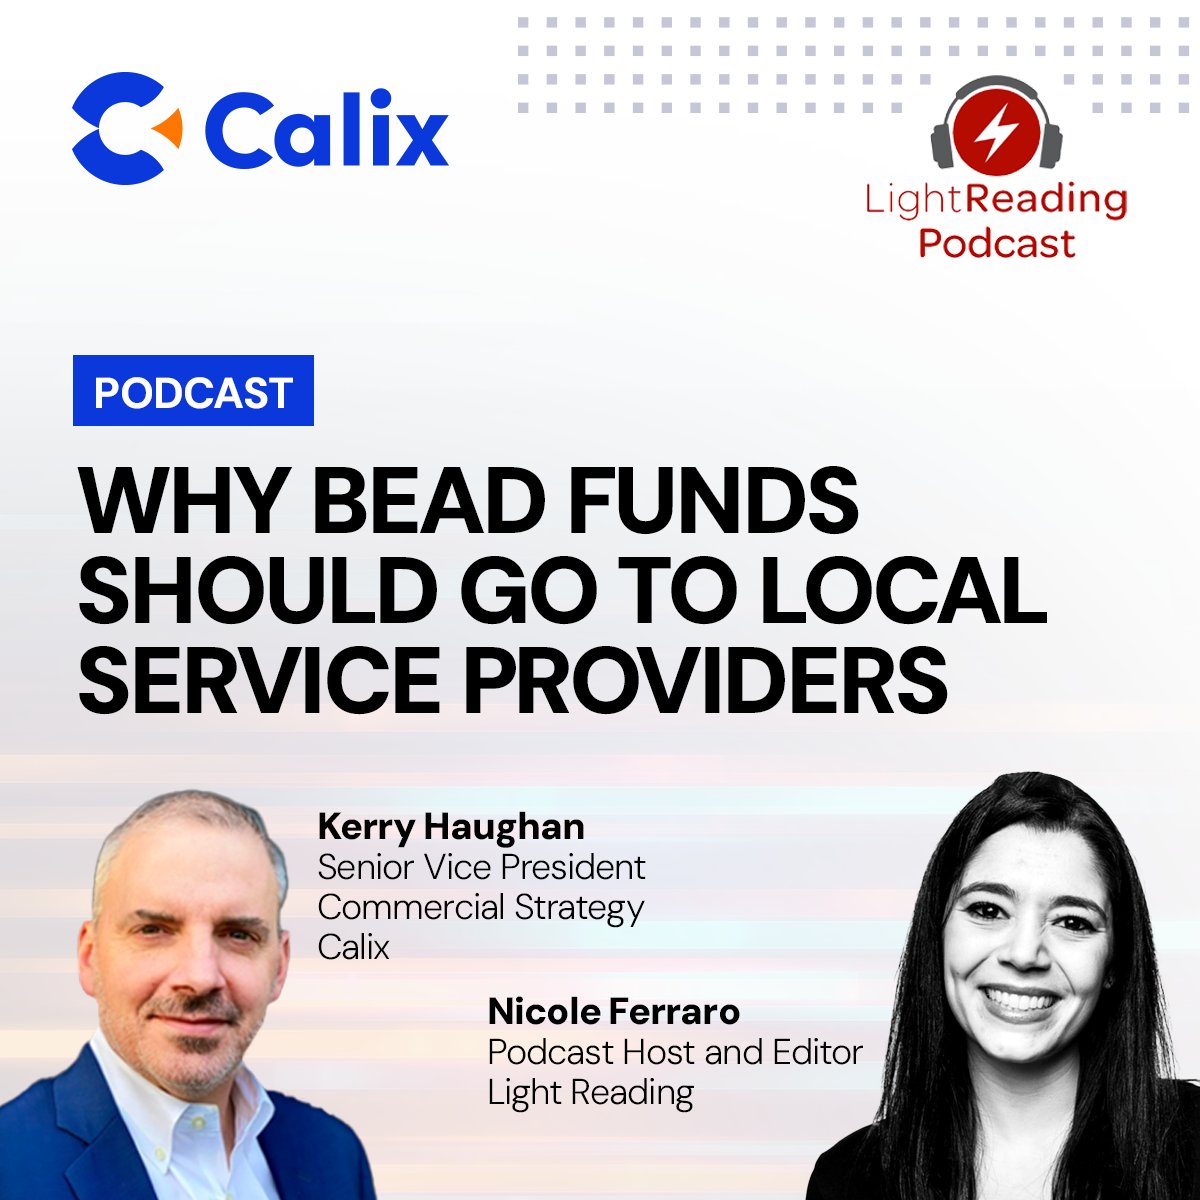 Kerry Haughan, SVP of commercial strategy for Calix, joins Nicole Ferraro on this episode of “The Divide” to discuss how the BEAD rollout is an opportunity to connect America and the value of local BSPs. Listen to the full podcast! 🔗ow.ly/uiBA50RmmwV @light_reading